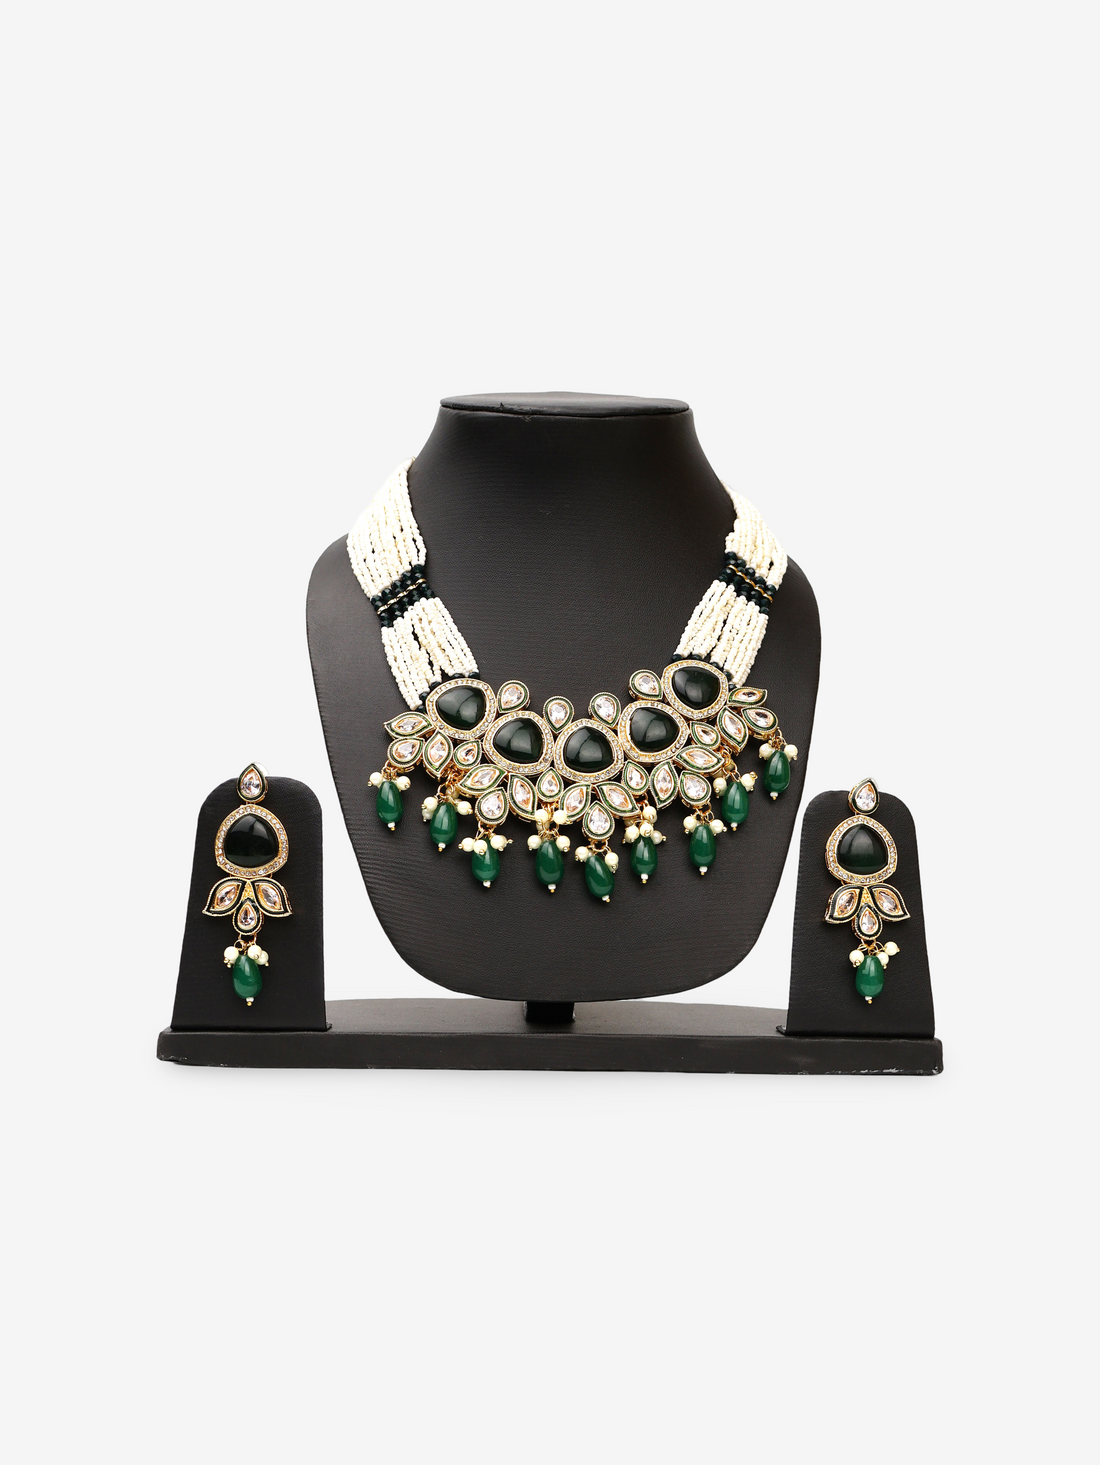 Black and Green Necklace set with Kundan and Pearl string Fashion Jewelry for Party Festival Wedding Occasion in Noida